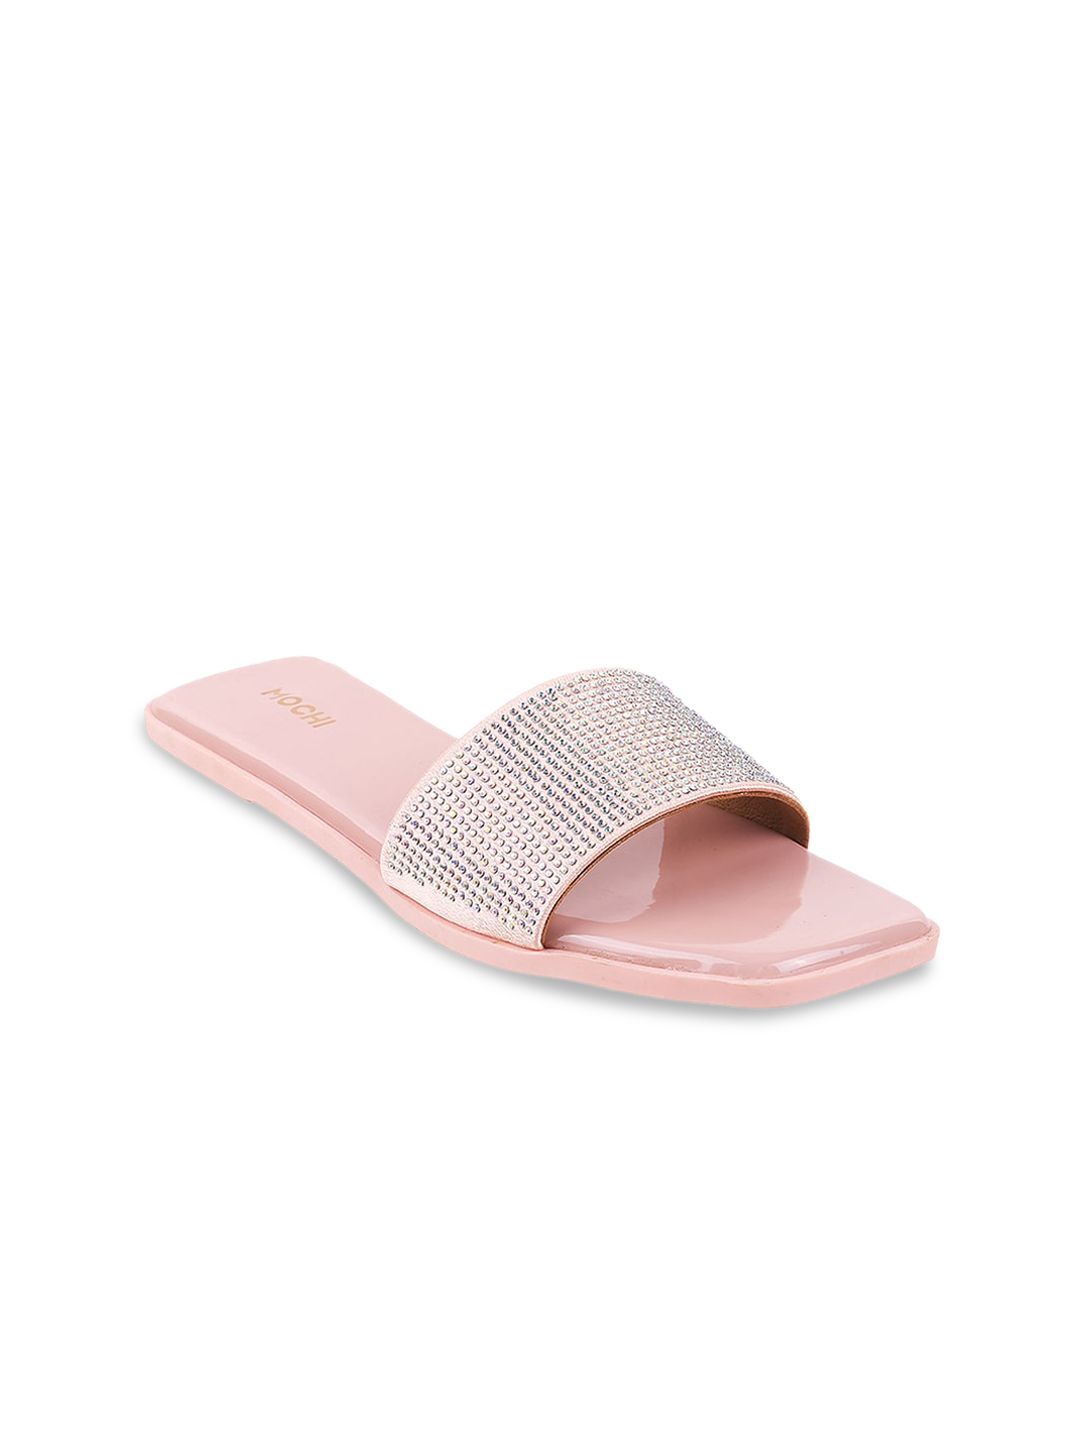 Mochi Women Pink Embellished Open Toe Flats Price in India